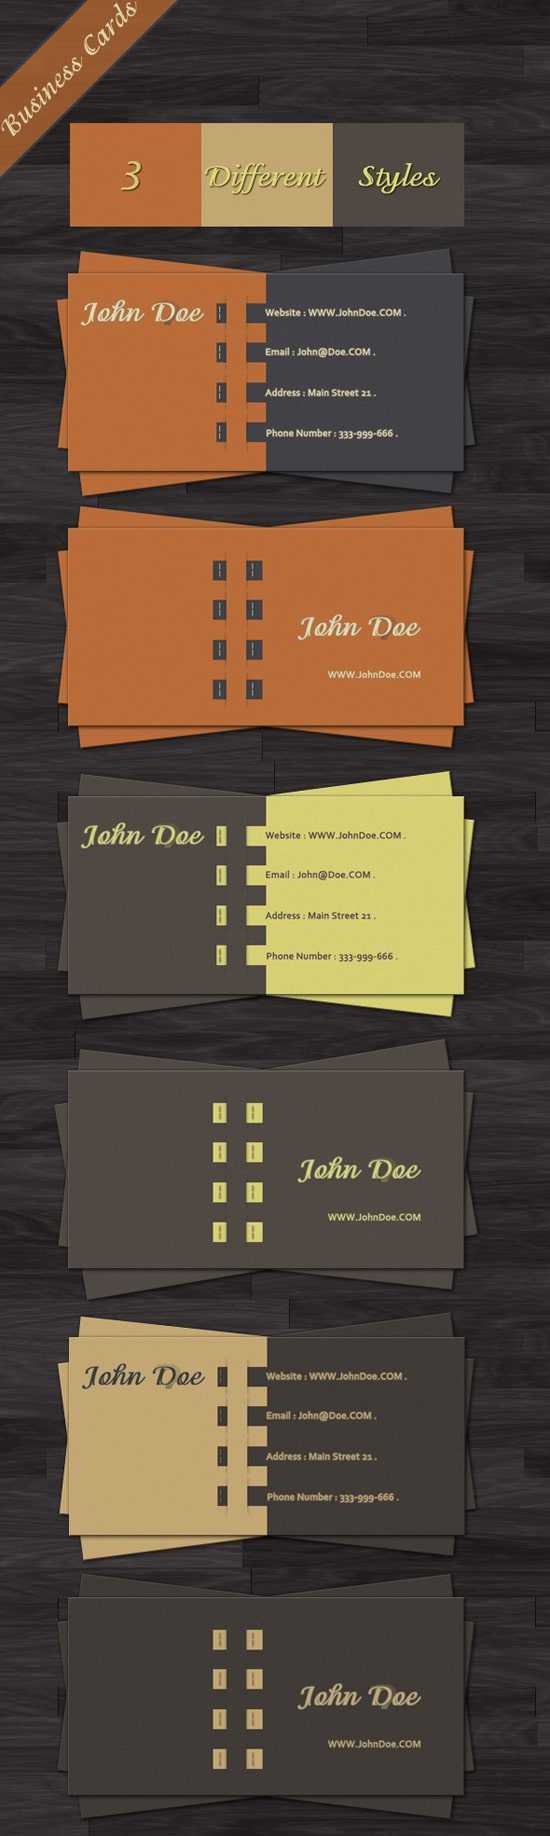 100 Free Business Card Templates – Designrfix Within Gimp Business Card Template